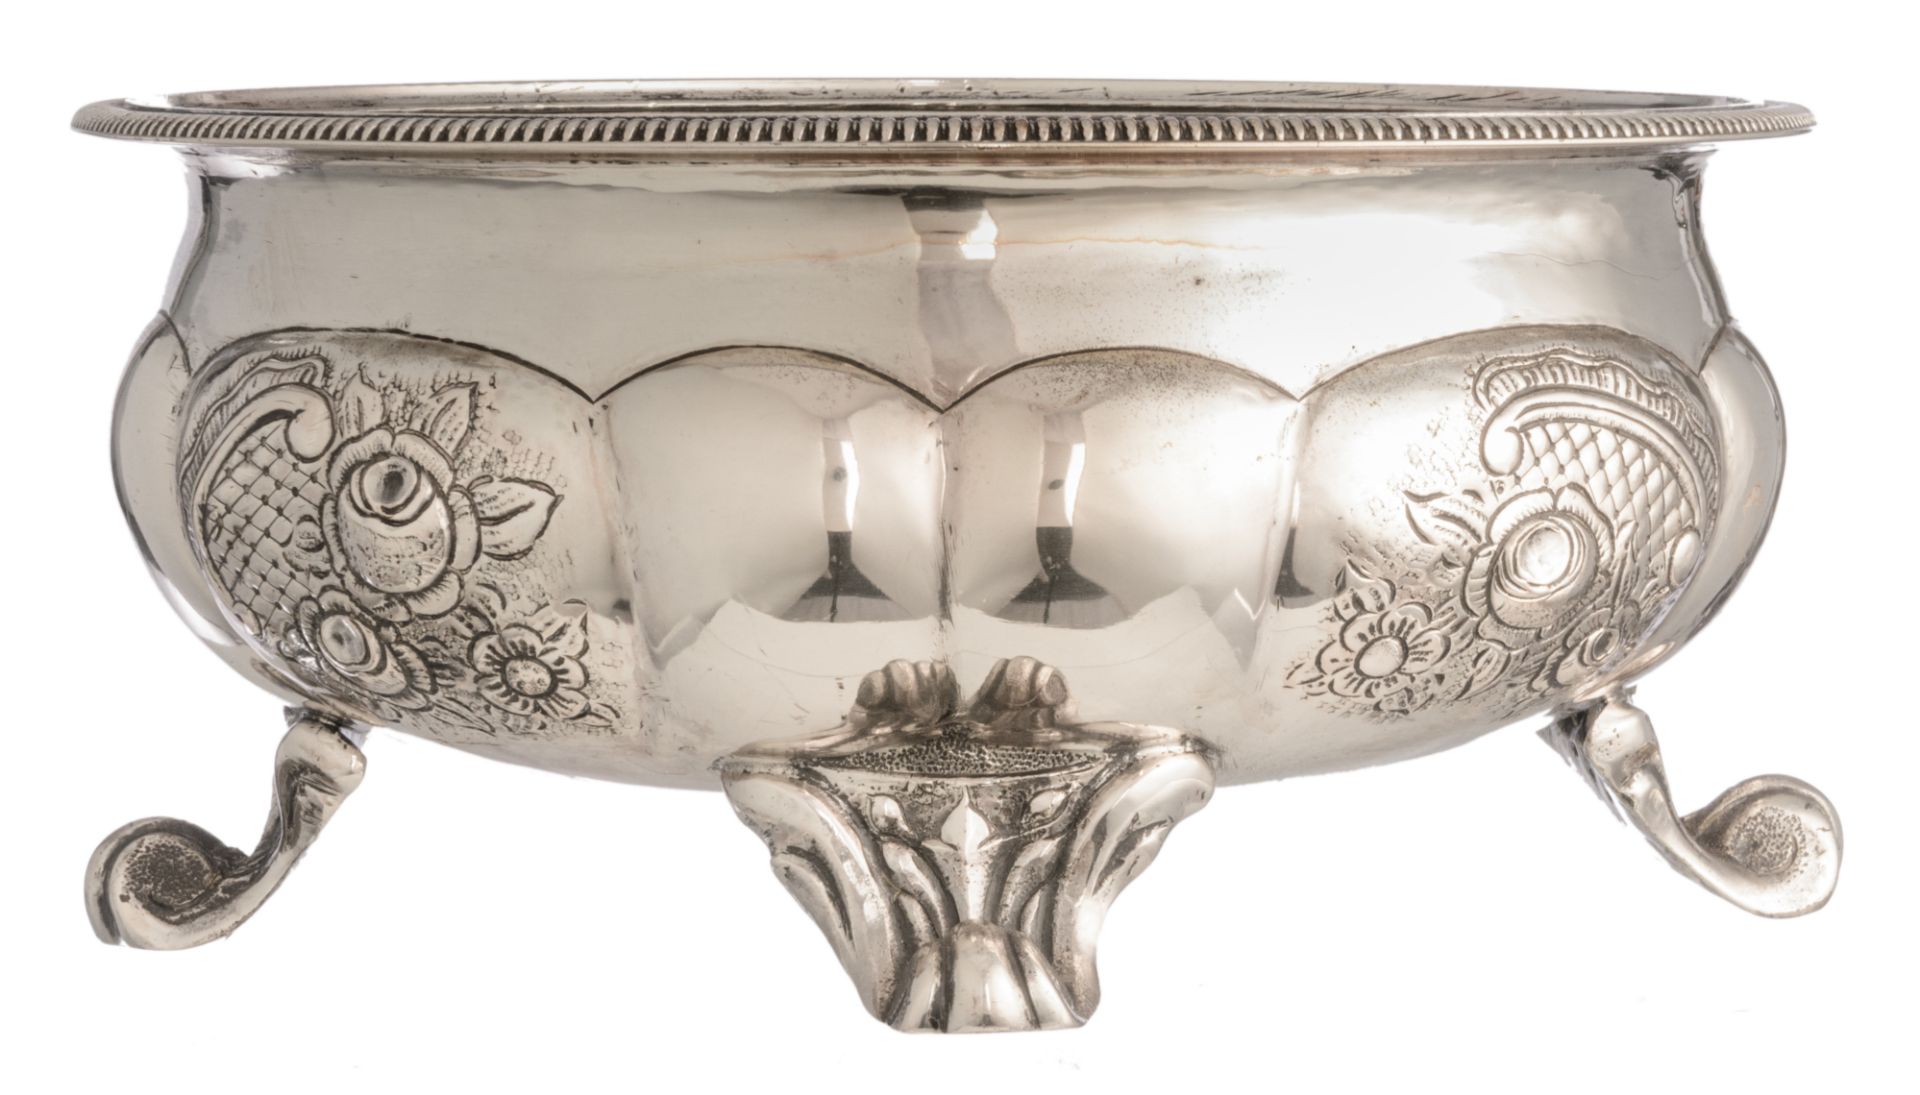 A 19thC Austro-Hungarian silver planter, Ø on top 24,4 cm - weight c. 1.380 g. - Image 2 of 6